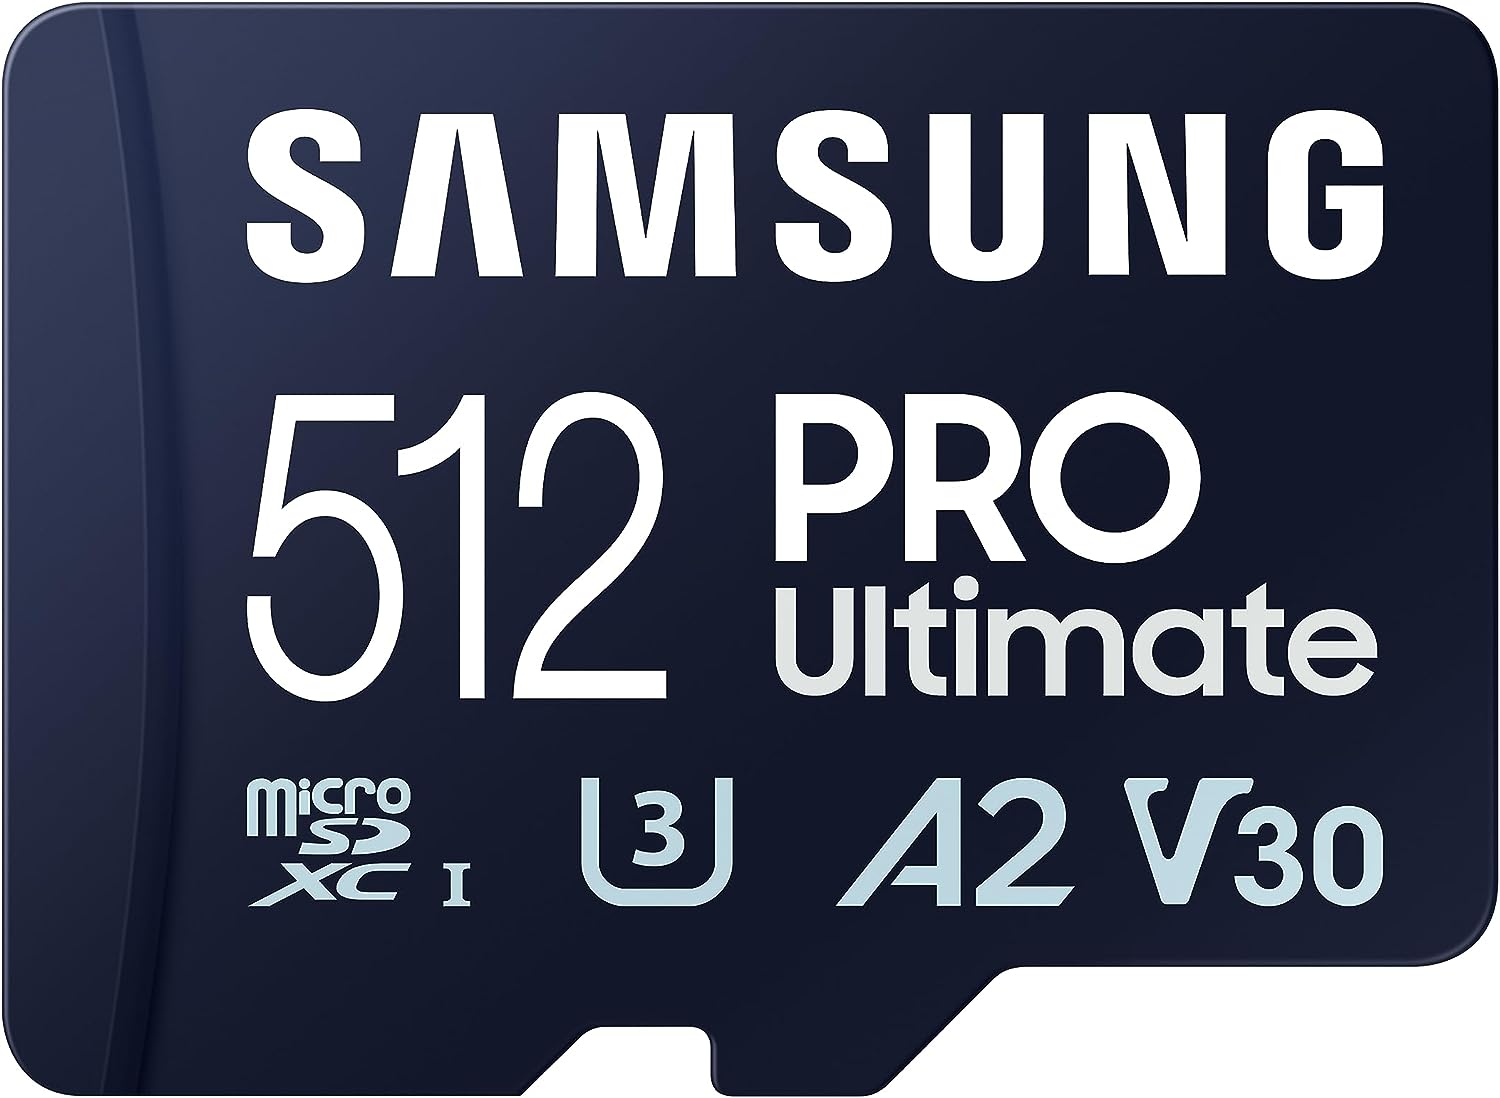 SAMSUNG PRO Ultimate microSD Memory Card + Adapter, 512GB microSDXC, Up to 200 MB/s, 4K UHD, UHS-I, Class 10, U3,V30, A2 for GoPRO Action Cam, DJI Drone, Gaming, Phones, Tablets, MB-MY128SA/AM